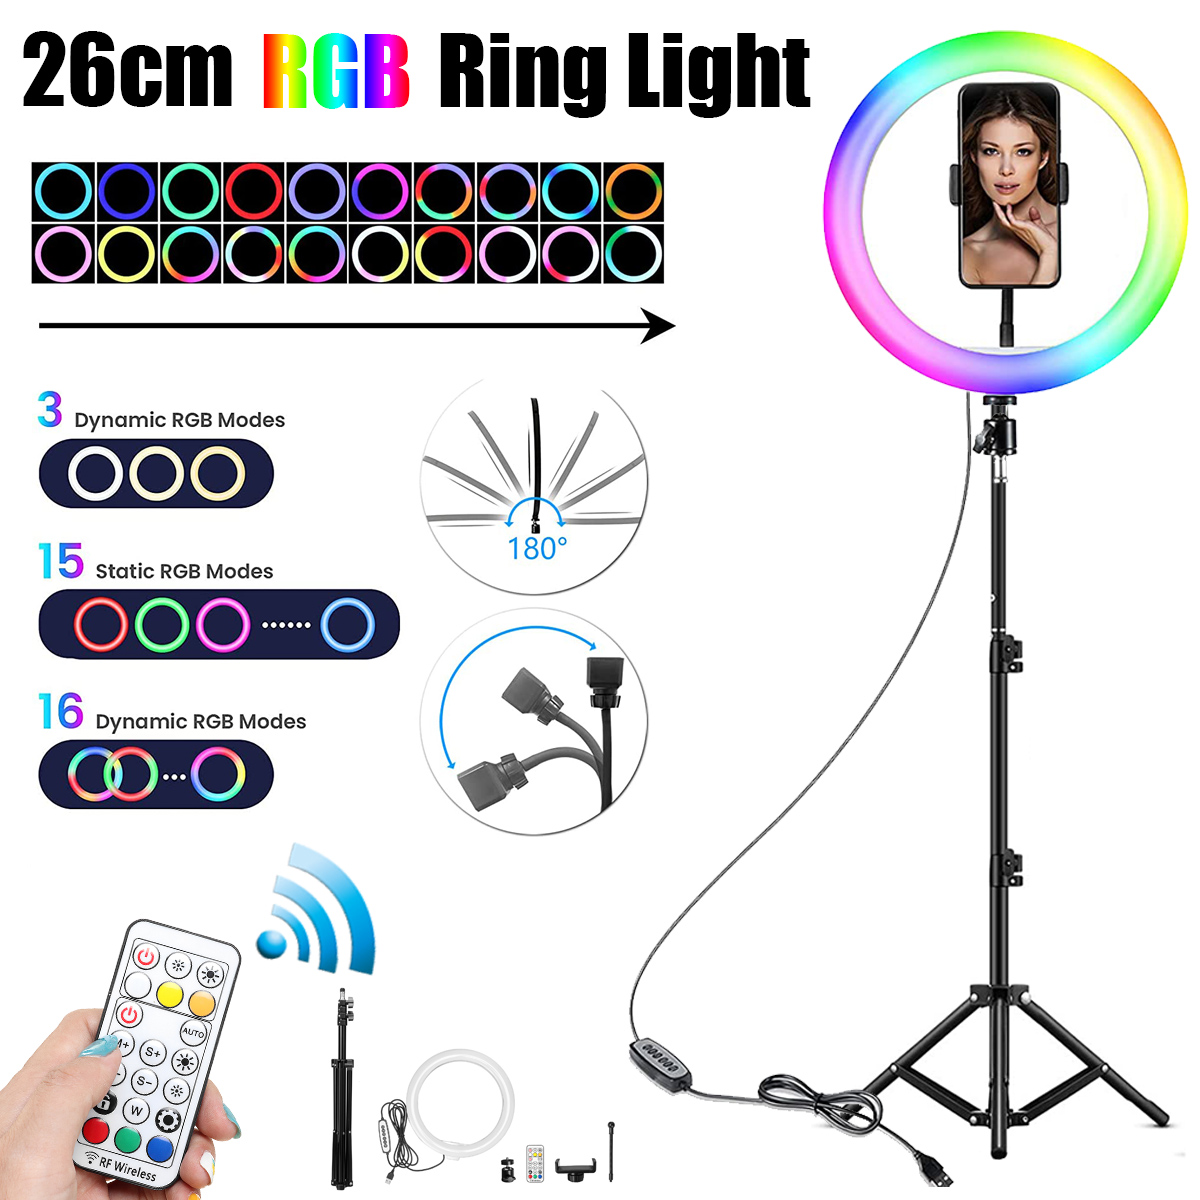 10-inch-3000K-6500K-LED-RGB-Ring-Light-With-Remote-Control-Tripod-Portable-USB-Ring-Light-Lamp-for-V-1949977-1